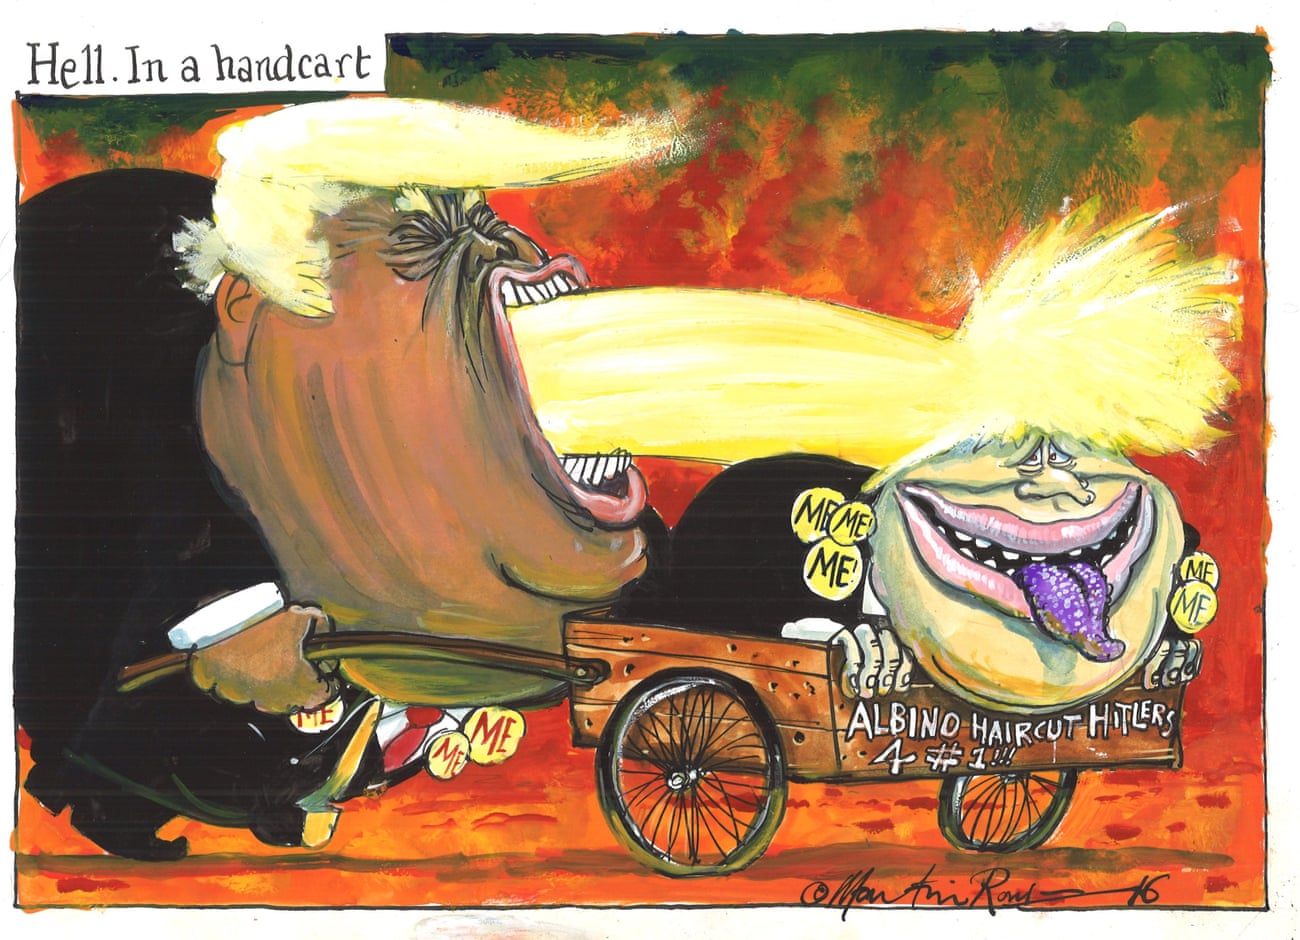 Hell. In a handcart by Martin Rowson (Guardian)